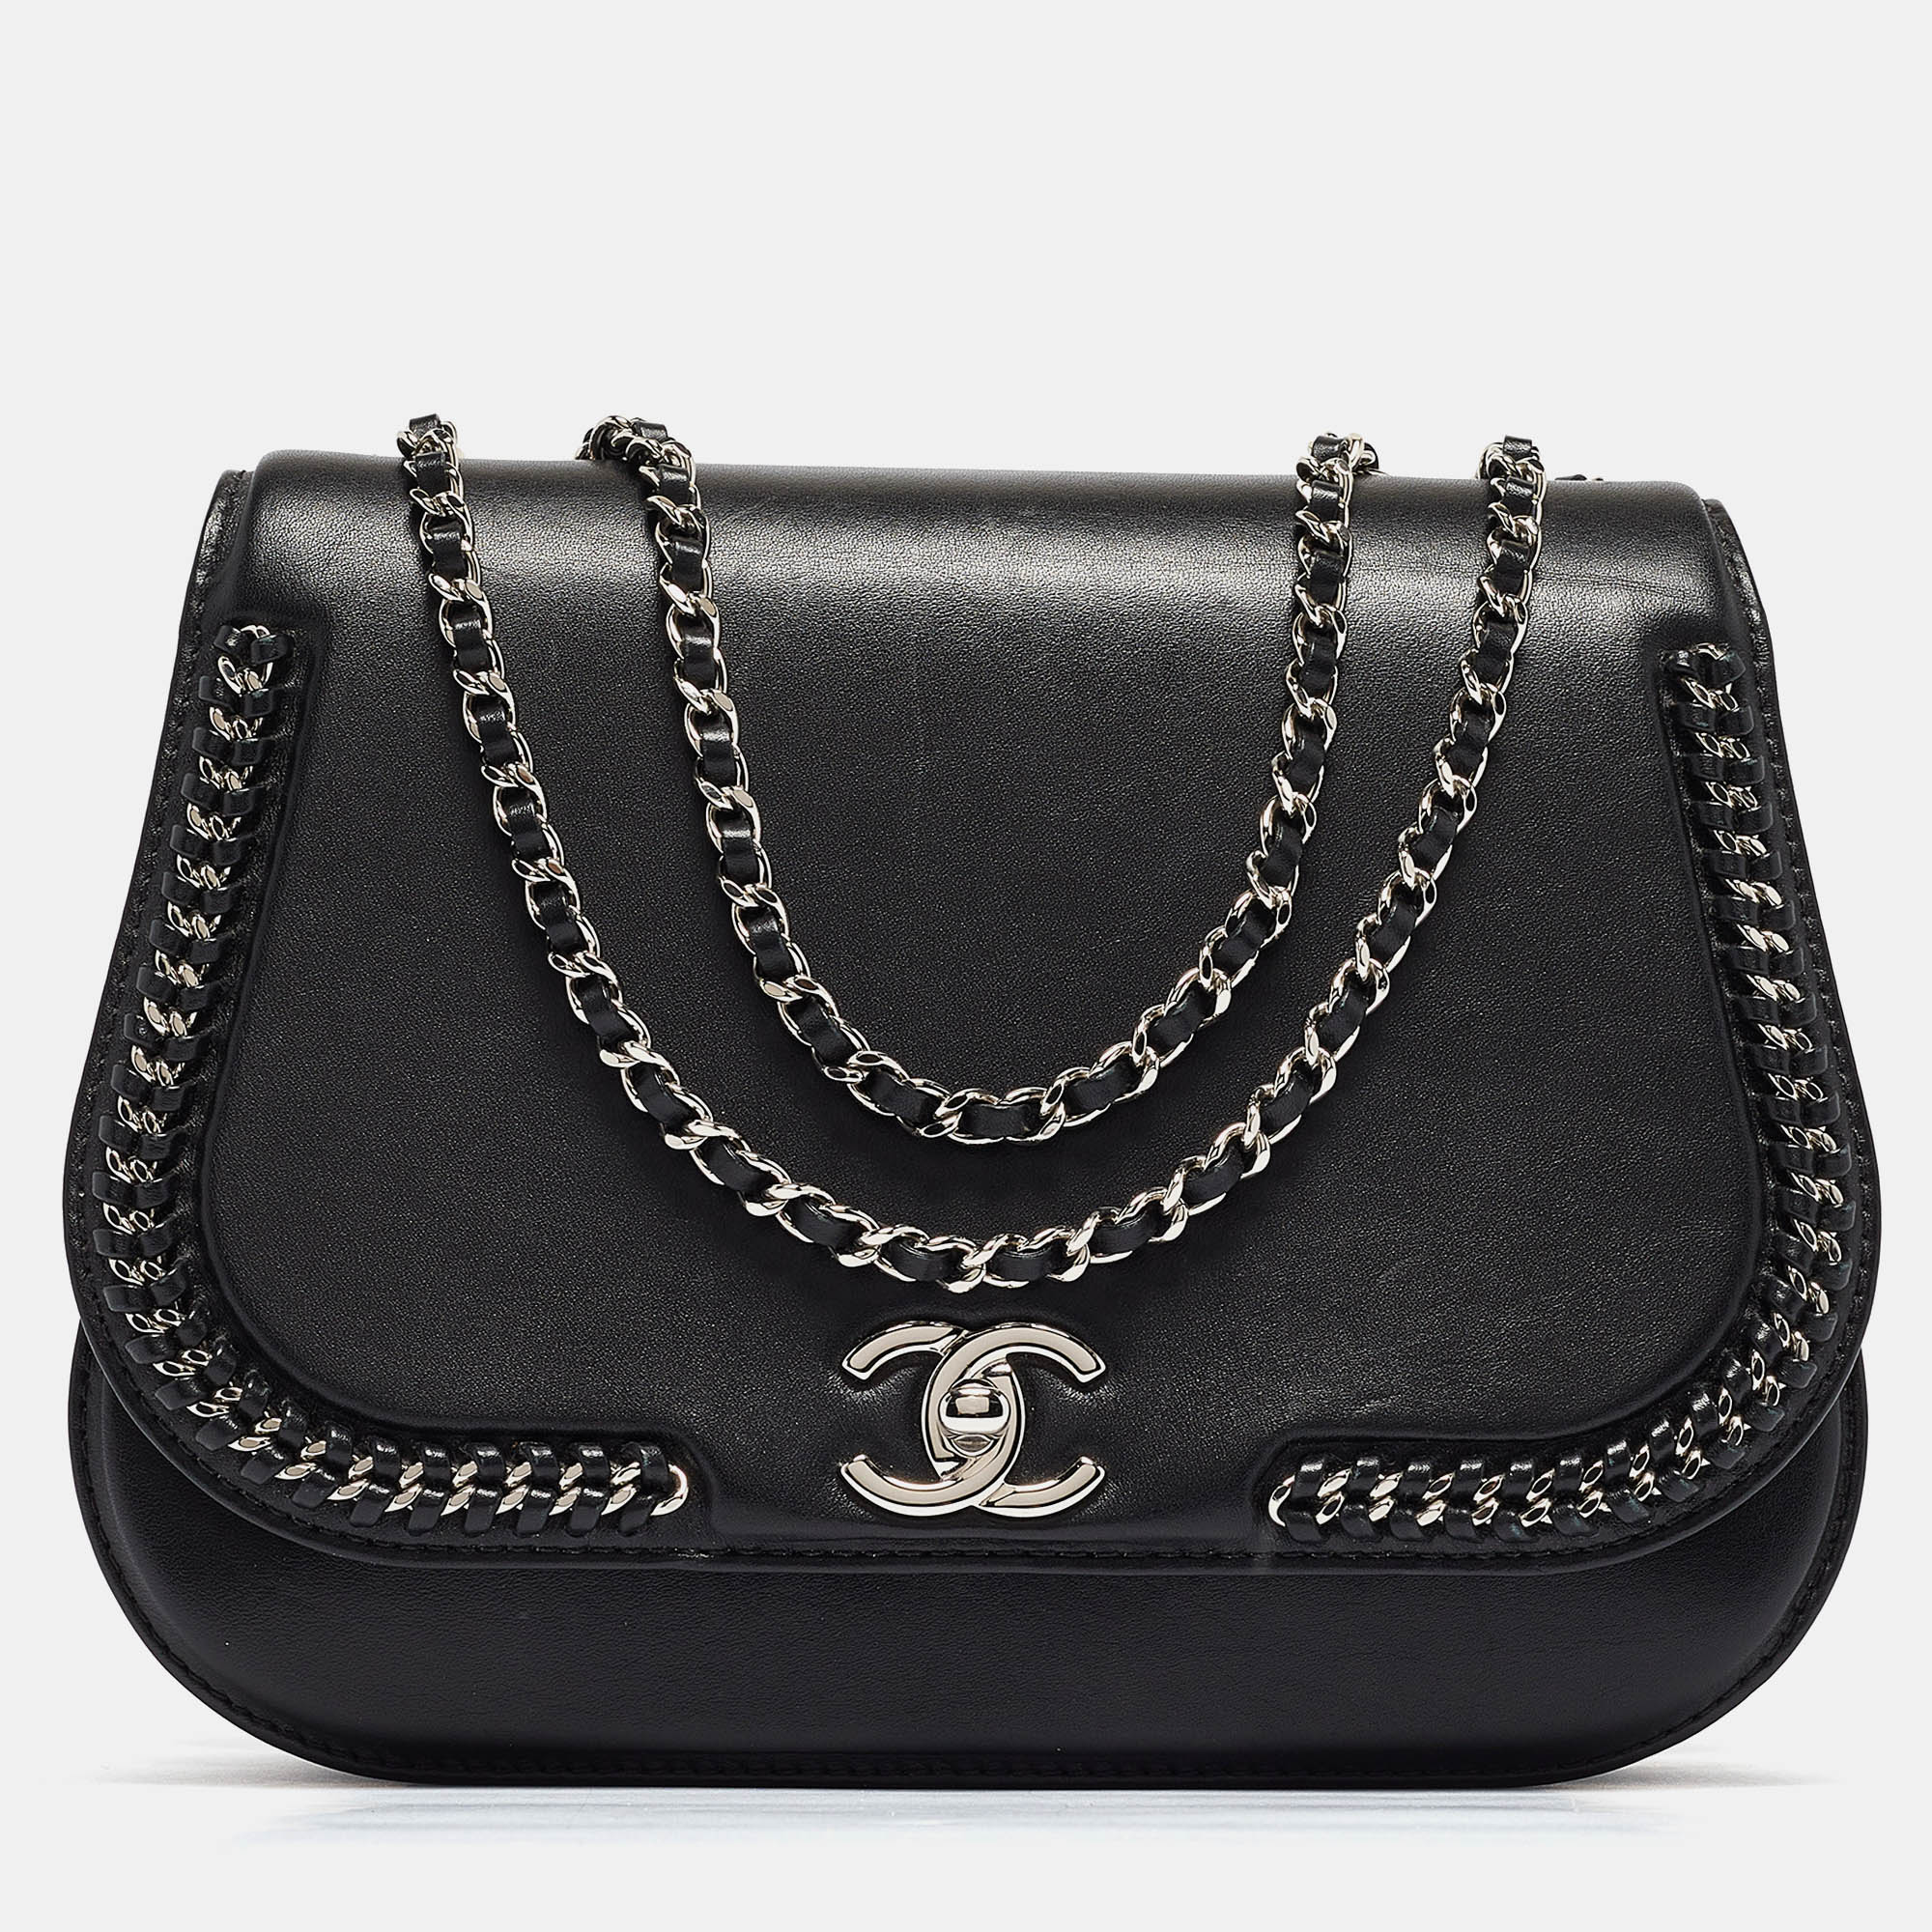 

Chanel Black Leather  Braided Chic Flap Bag